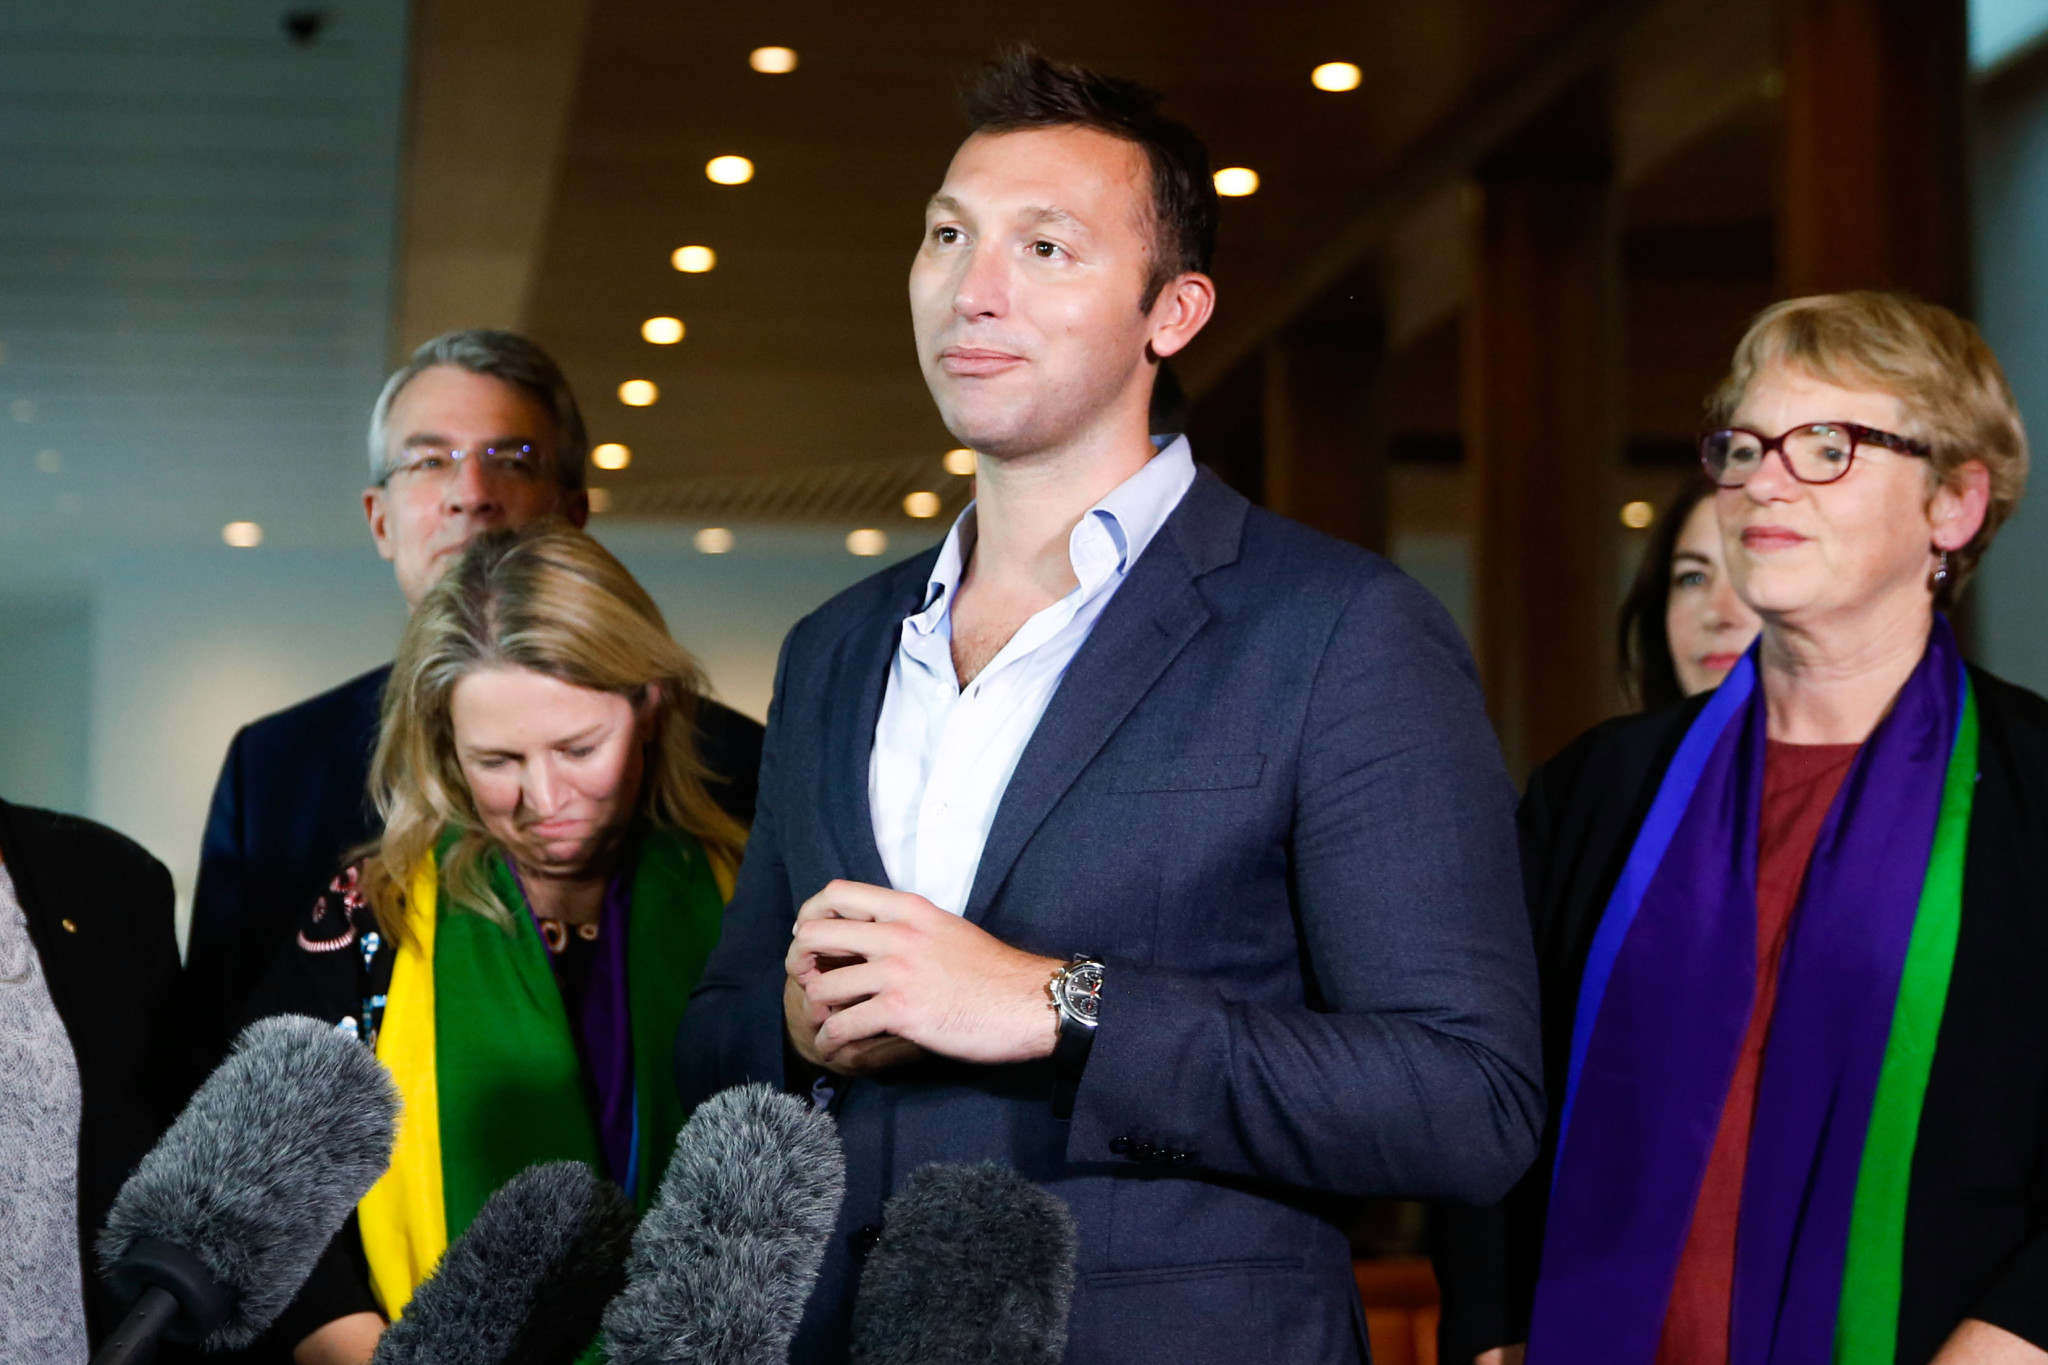 Australian swimming legend Ian Thorpe has admitted he would be concerned about competing at Tokyo 2020 ©Getty Images